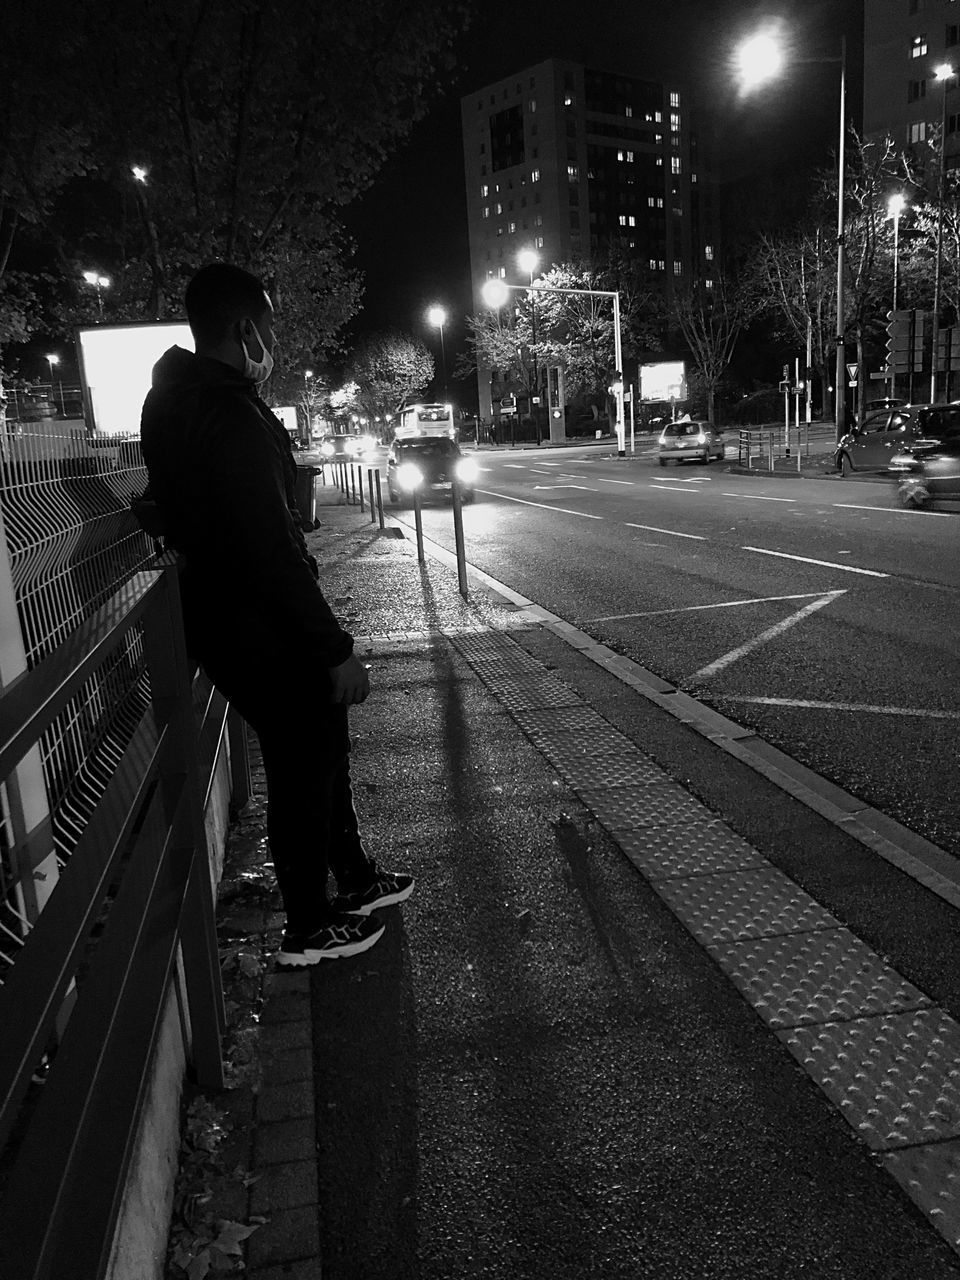 night, darkness, black, black and white, city, one person, monochrome, street, architecture, monochrome photography, white, illuminated, road, light, transportation, men, street light, full length, building exterior, built structure, city life, infrastructure, adult, lane, mode of transportation, lifestyles, person, city street, rear view, outdoors, standing, clothing